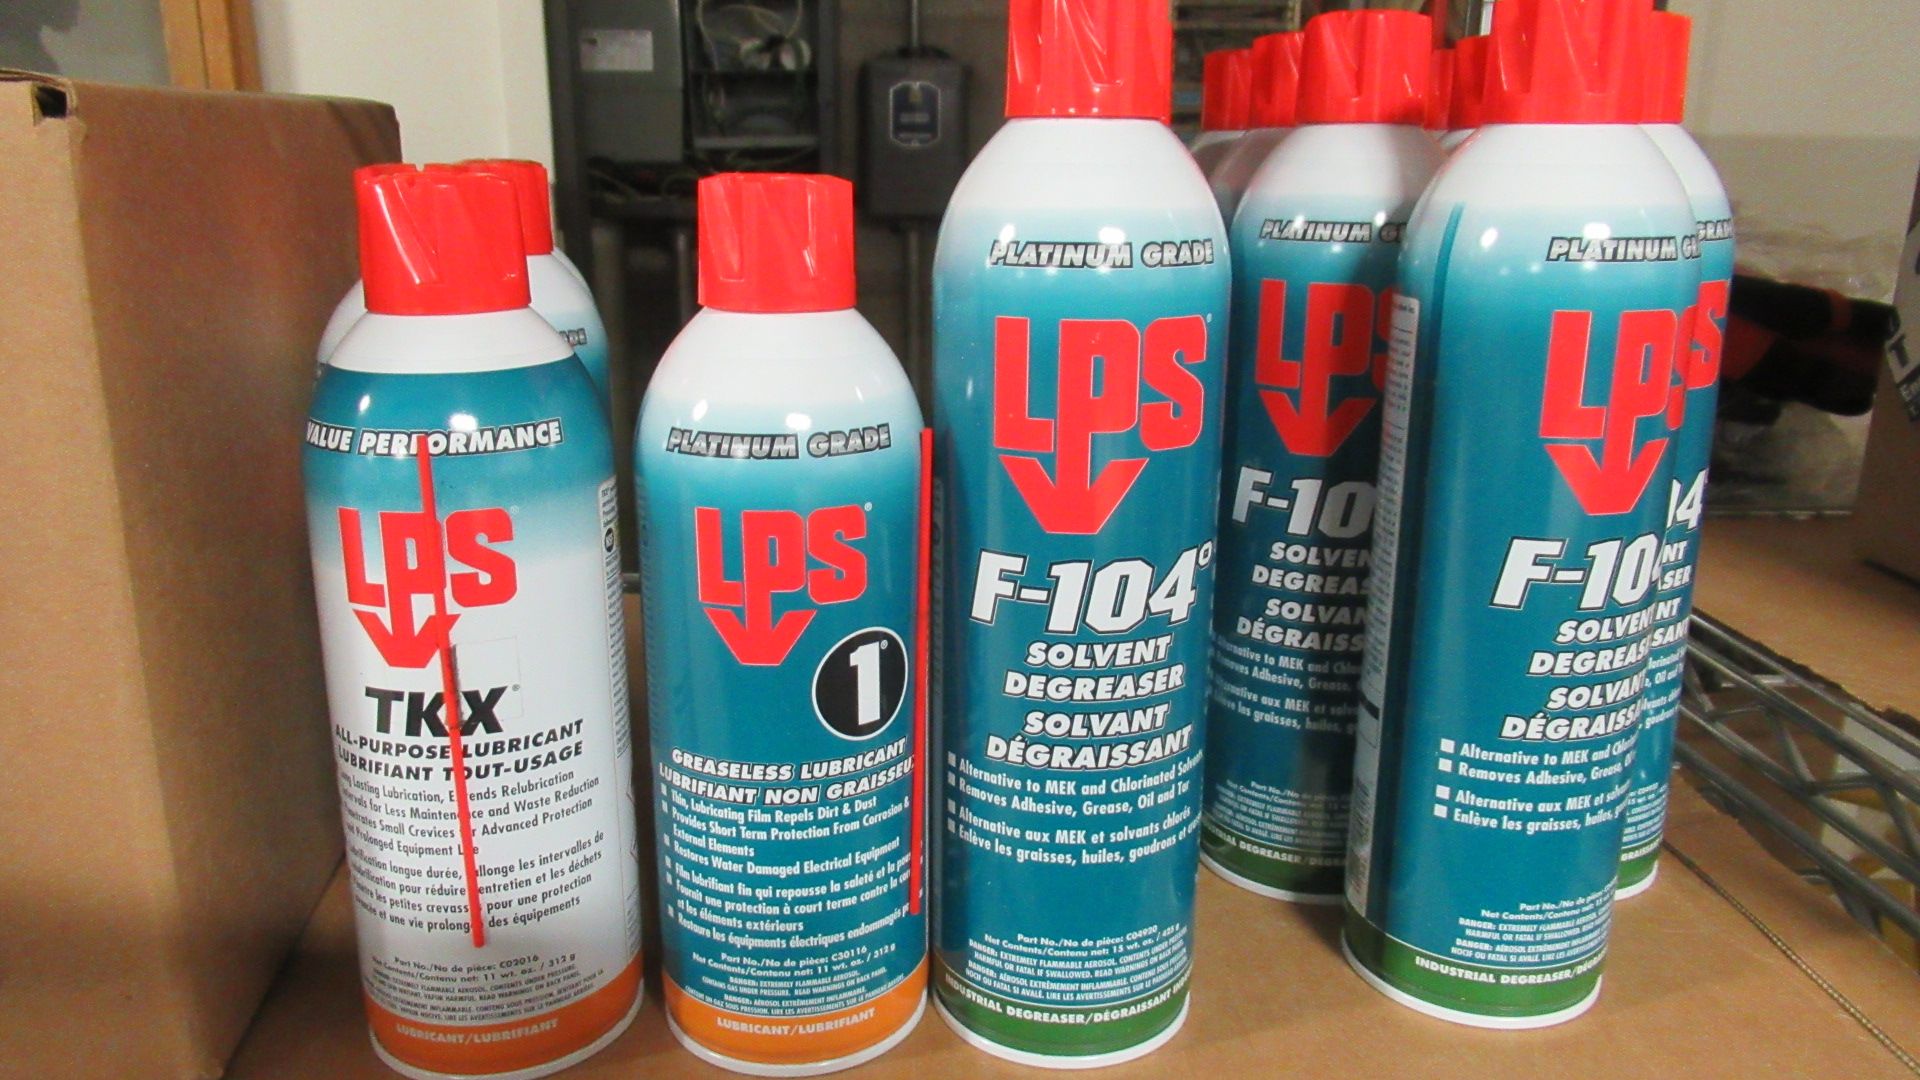 LOT DE 50 ASST LPS PRODUCTS (F 104 DEGREASER, GREASELESS LUBRICANT & ALL PUPOSE LUBRICANT)